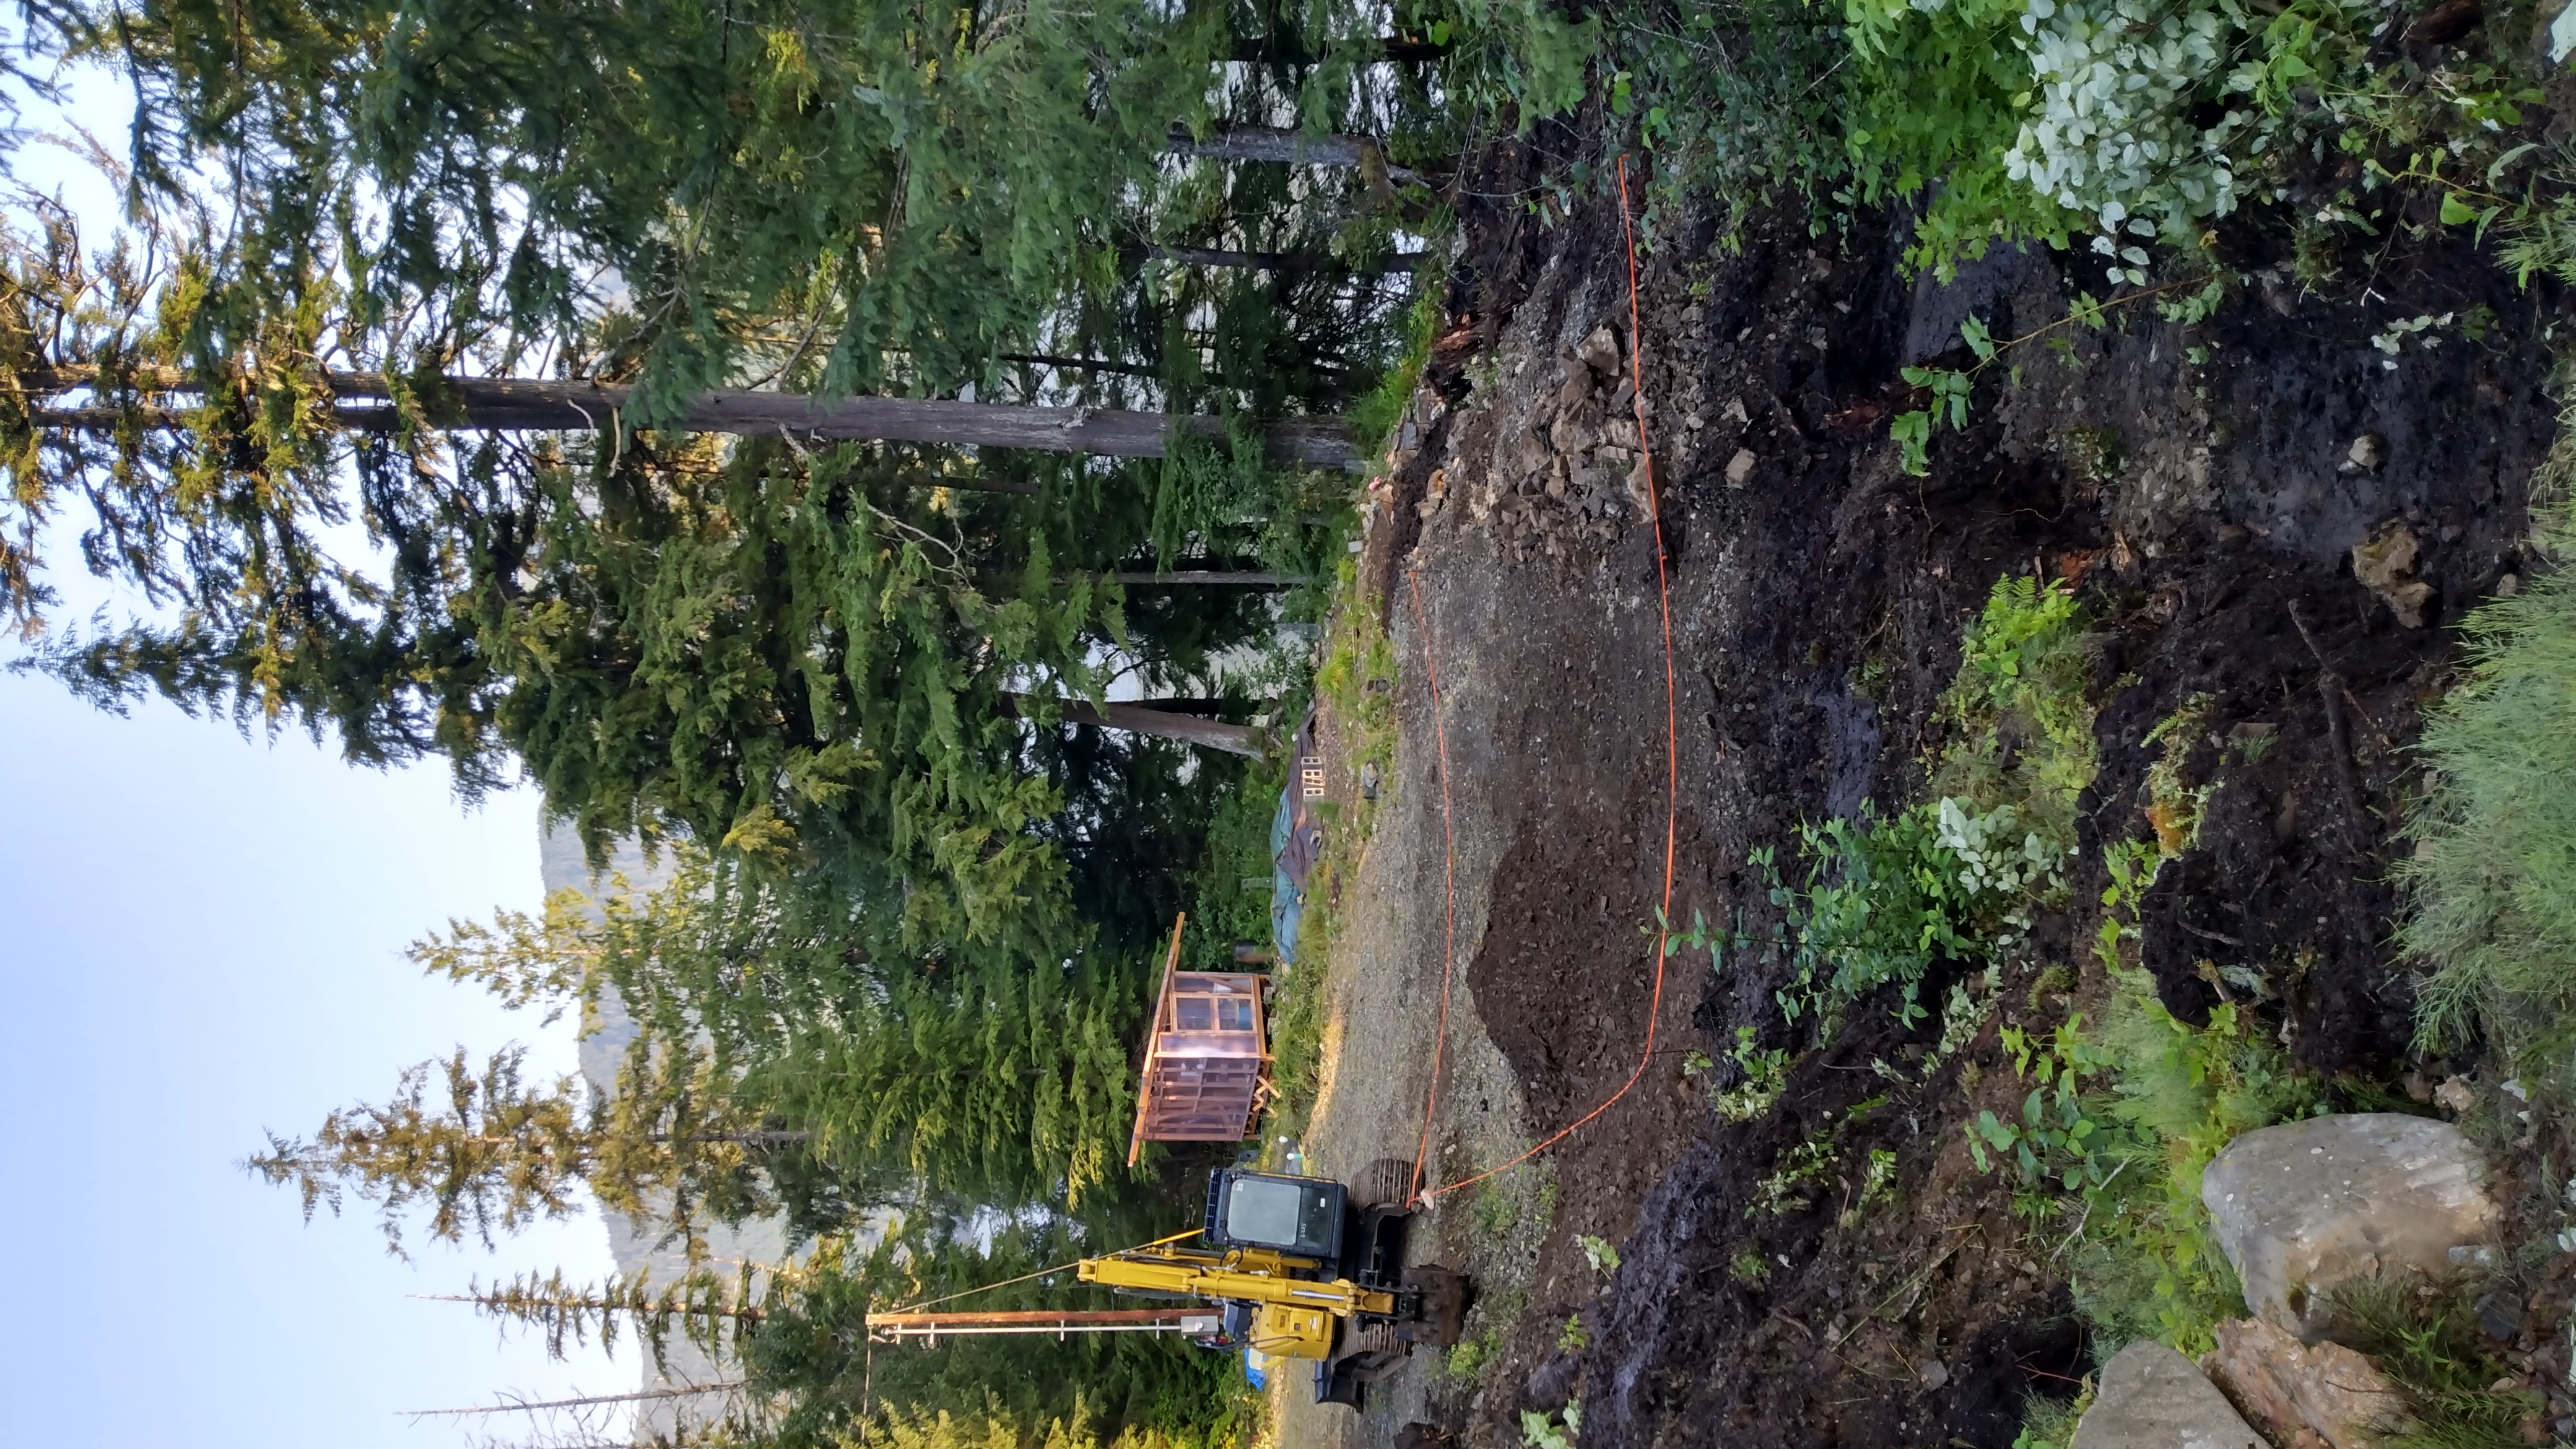 A view down a steep hillside with an excavator at the bottom of a gravel driveway and some tall trees in the background. The excavator has clearly been doing some work, making ditches and such